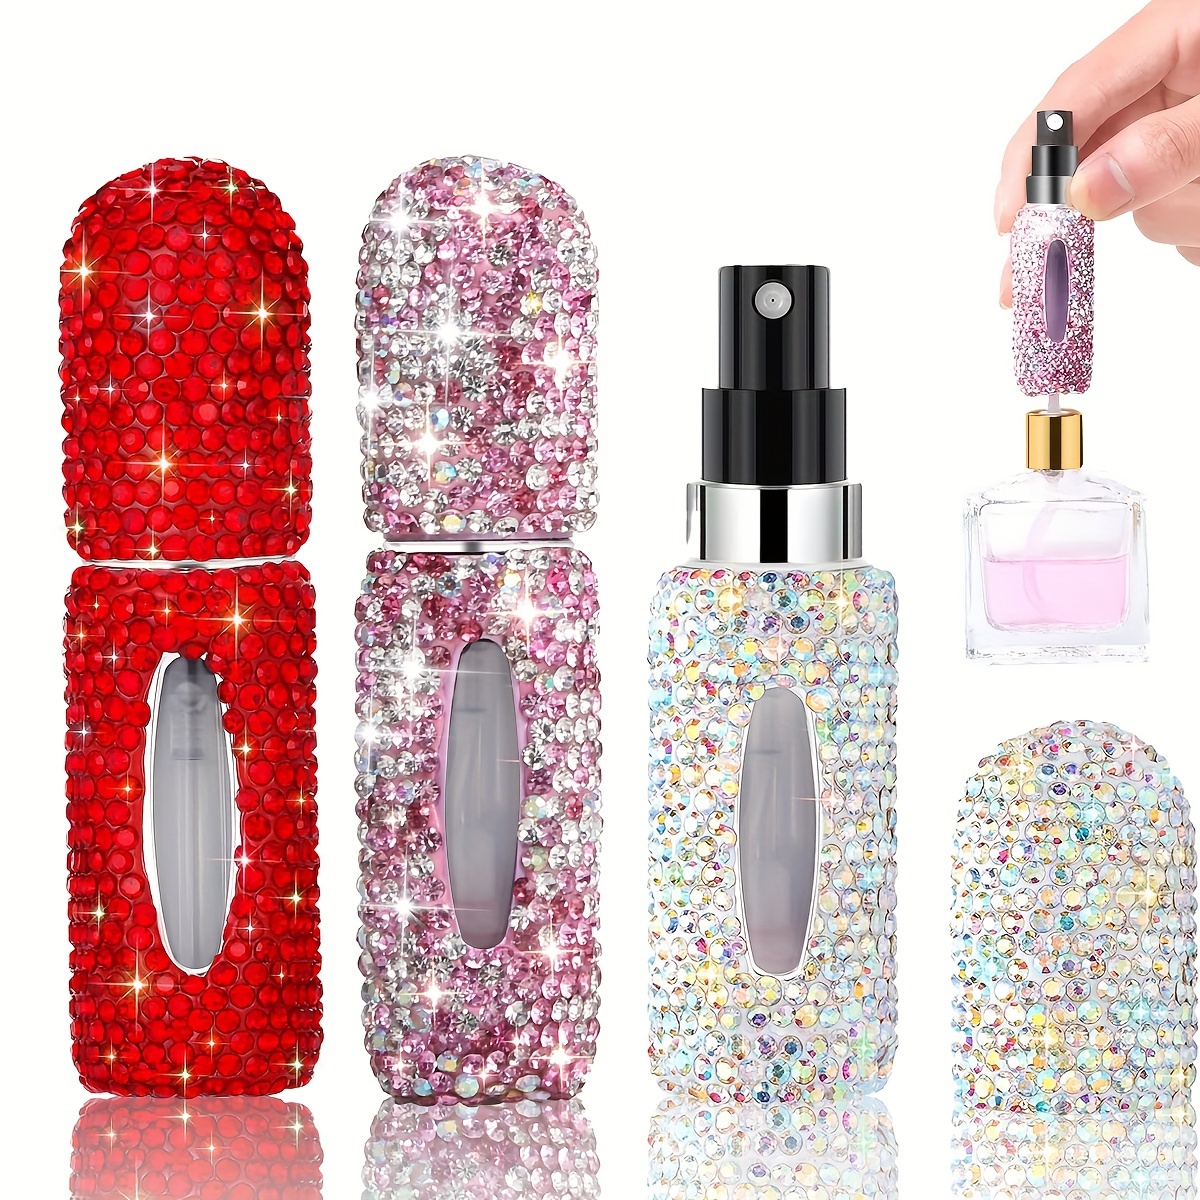 Travel Spray Refill Le Jour Se Lève - Perfumes - Collections